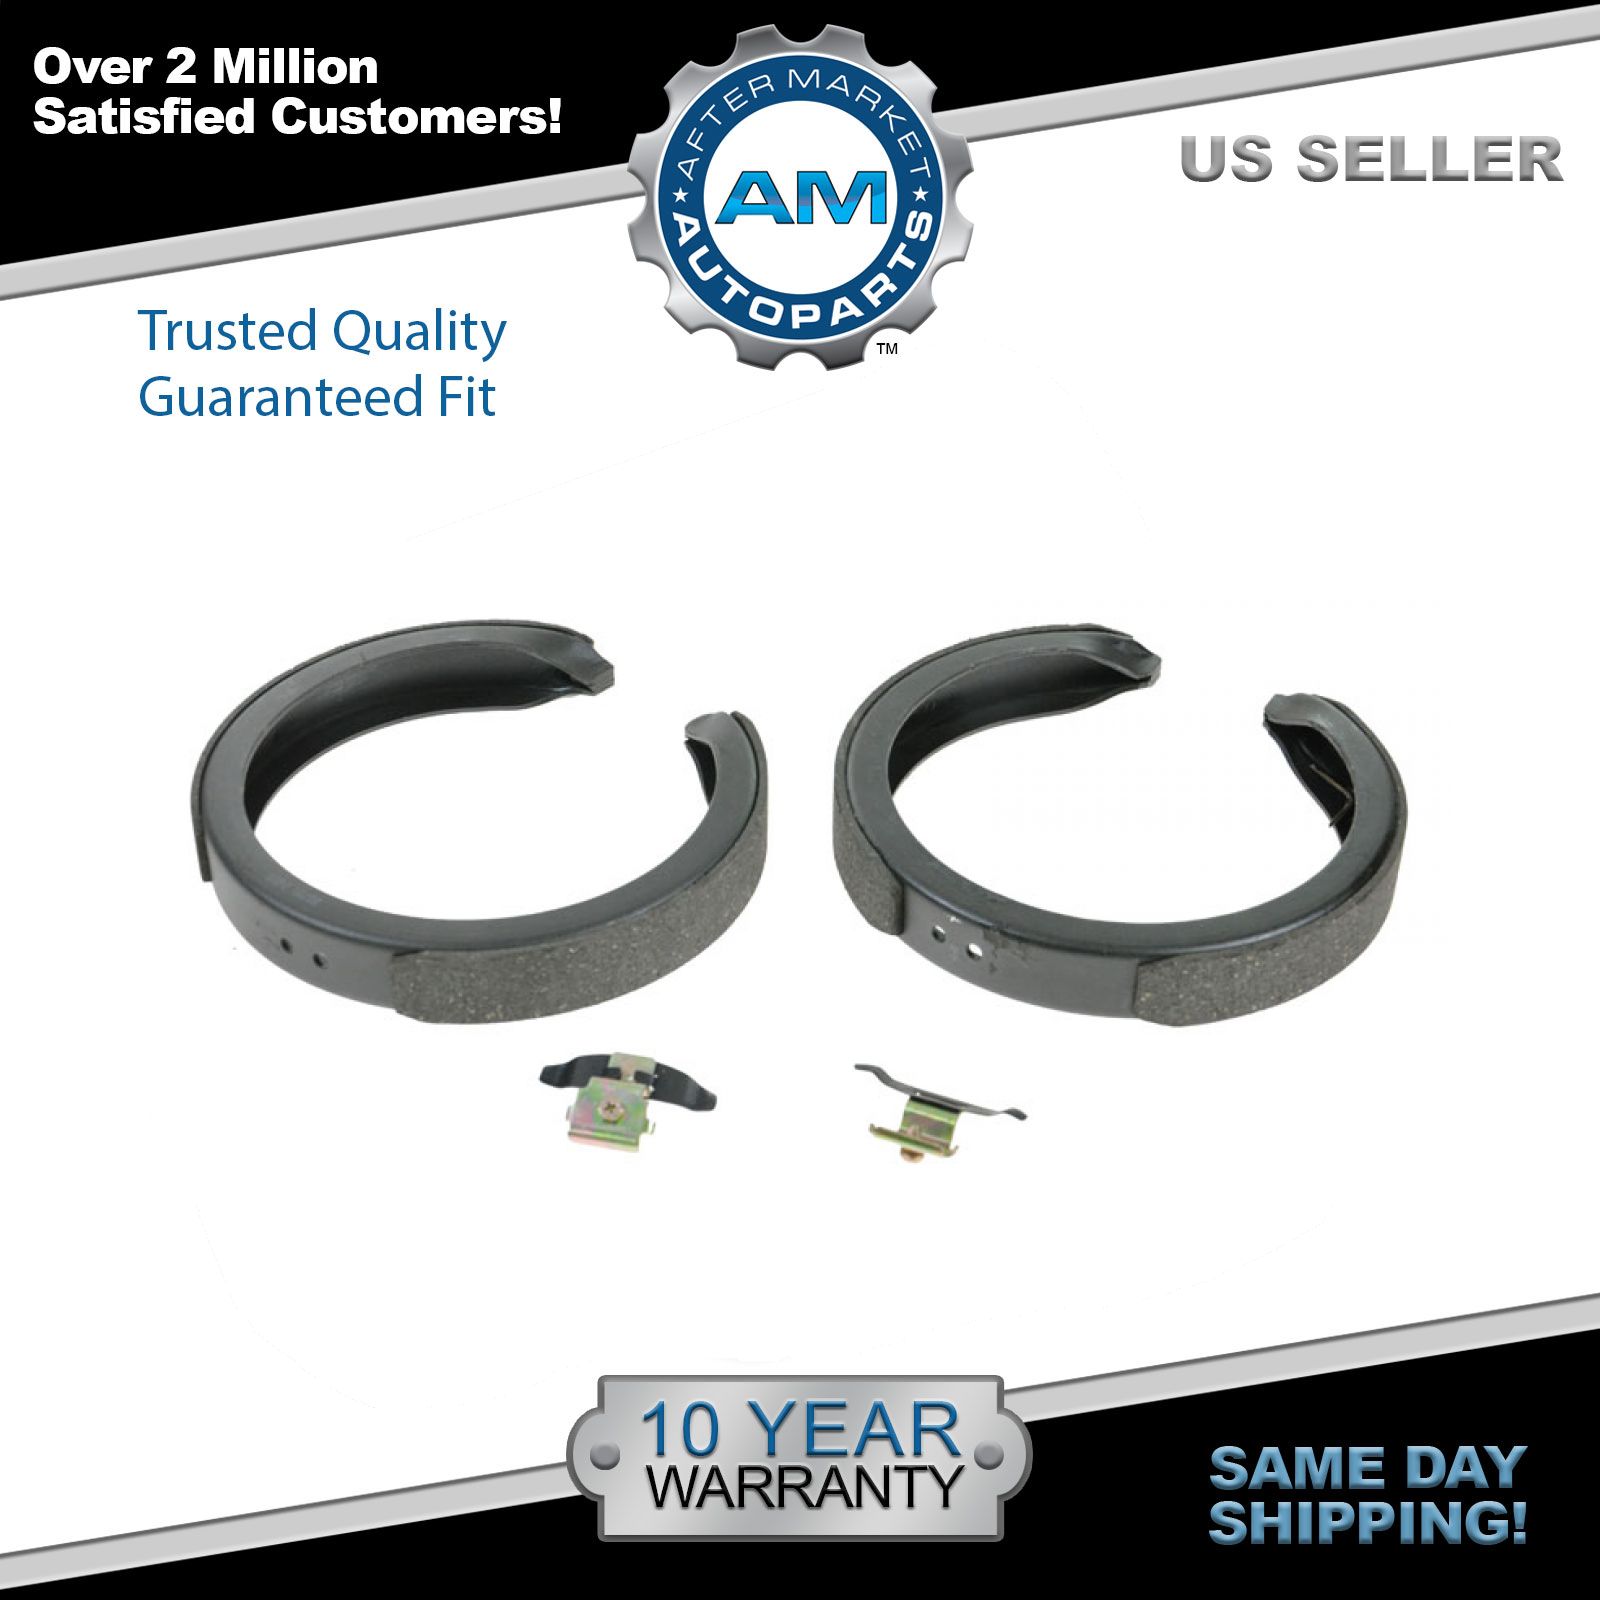 Rear Parking Emergency Brake Shoe Kit for Chevy GMC Cadillac Buick Olds